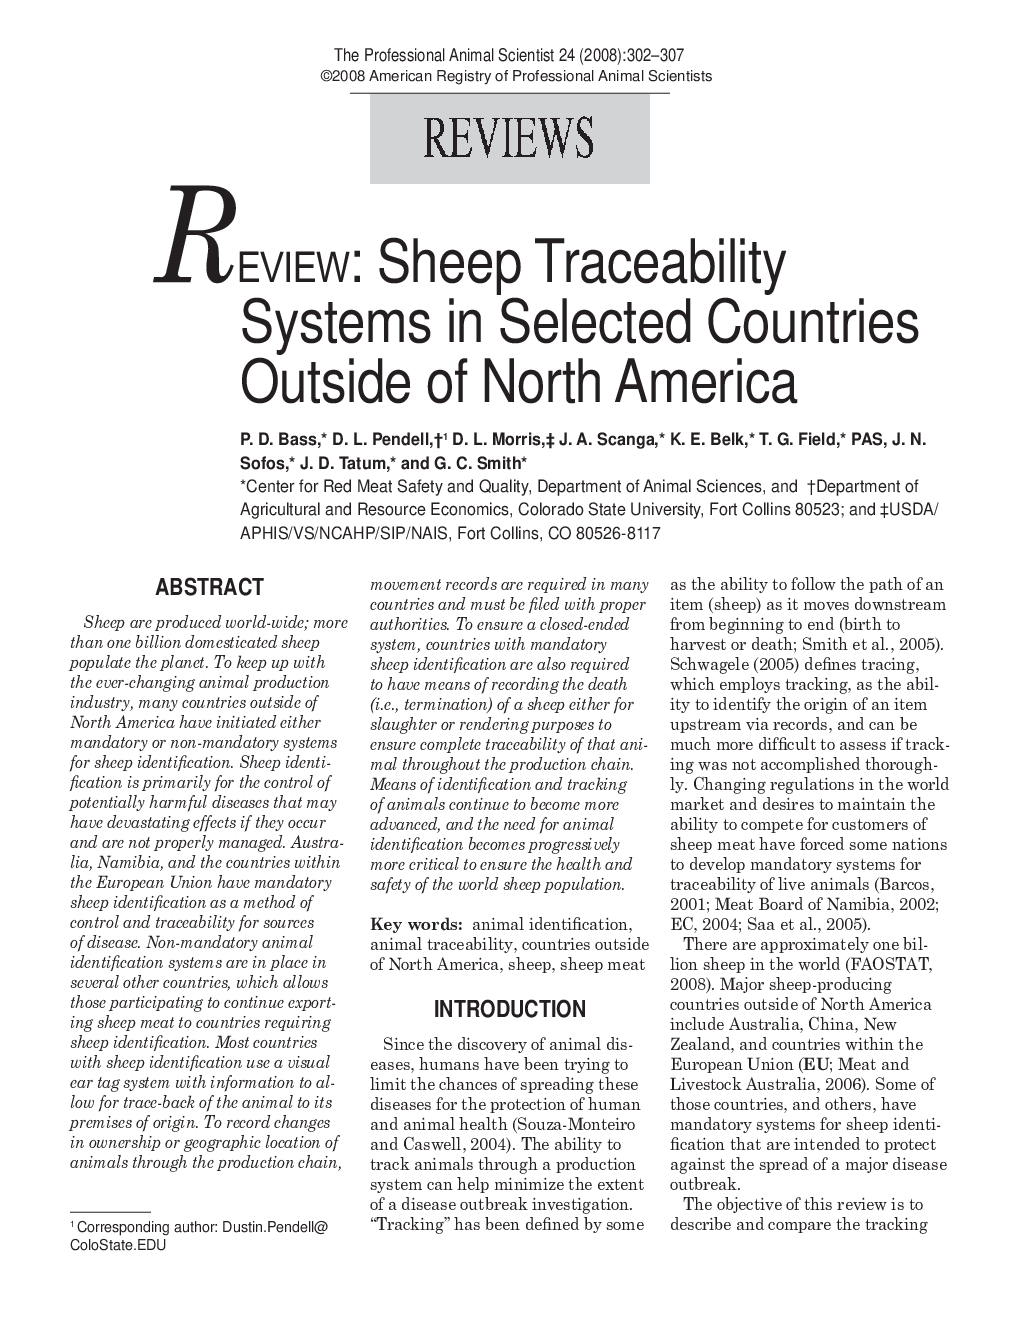 Review: Sheep Traceability Systems in Selected Countries Outside of North America